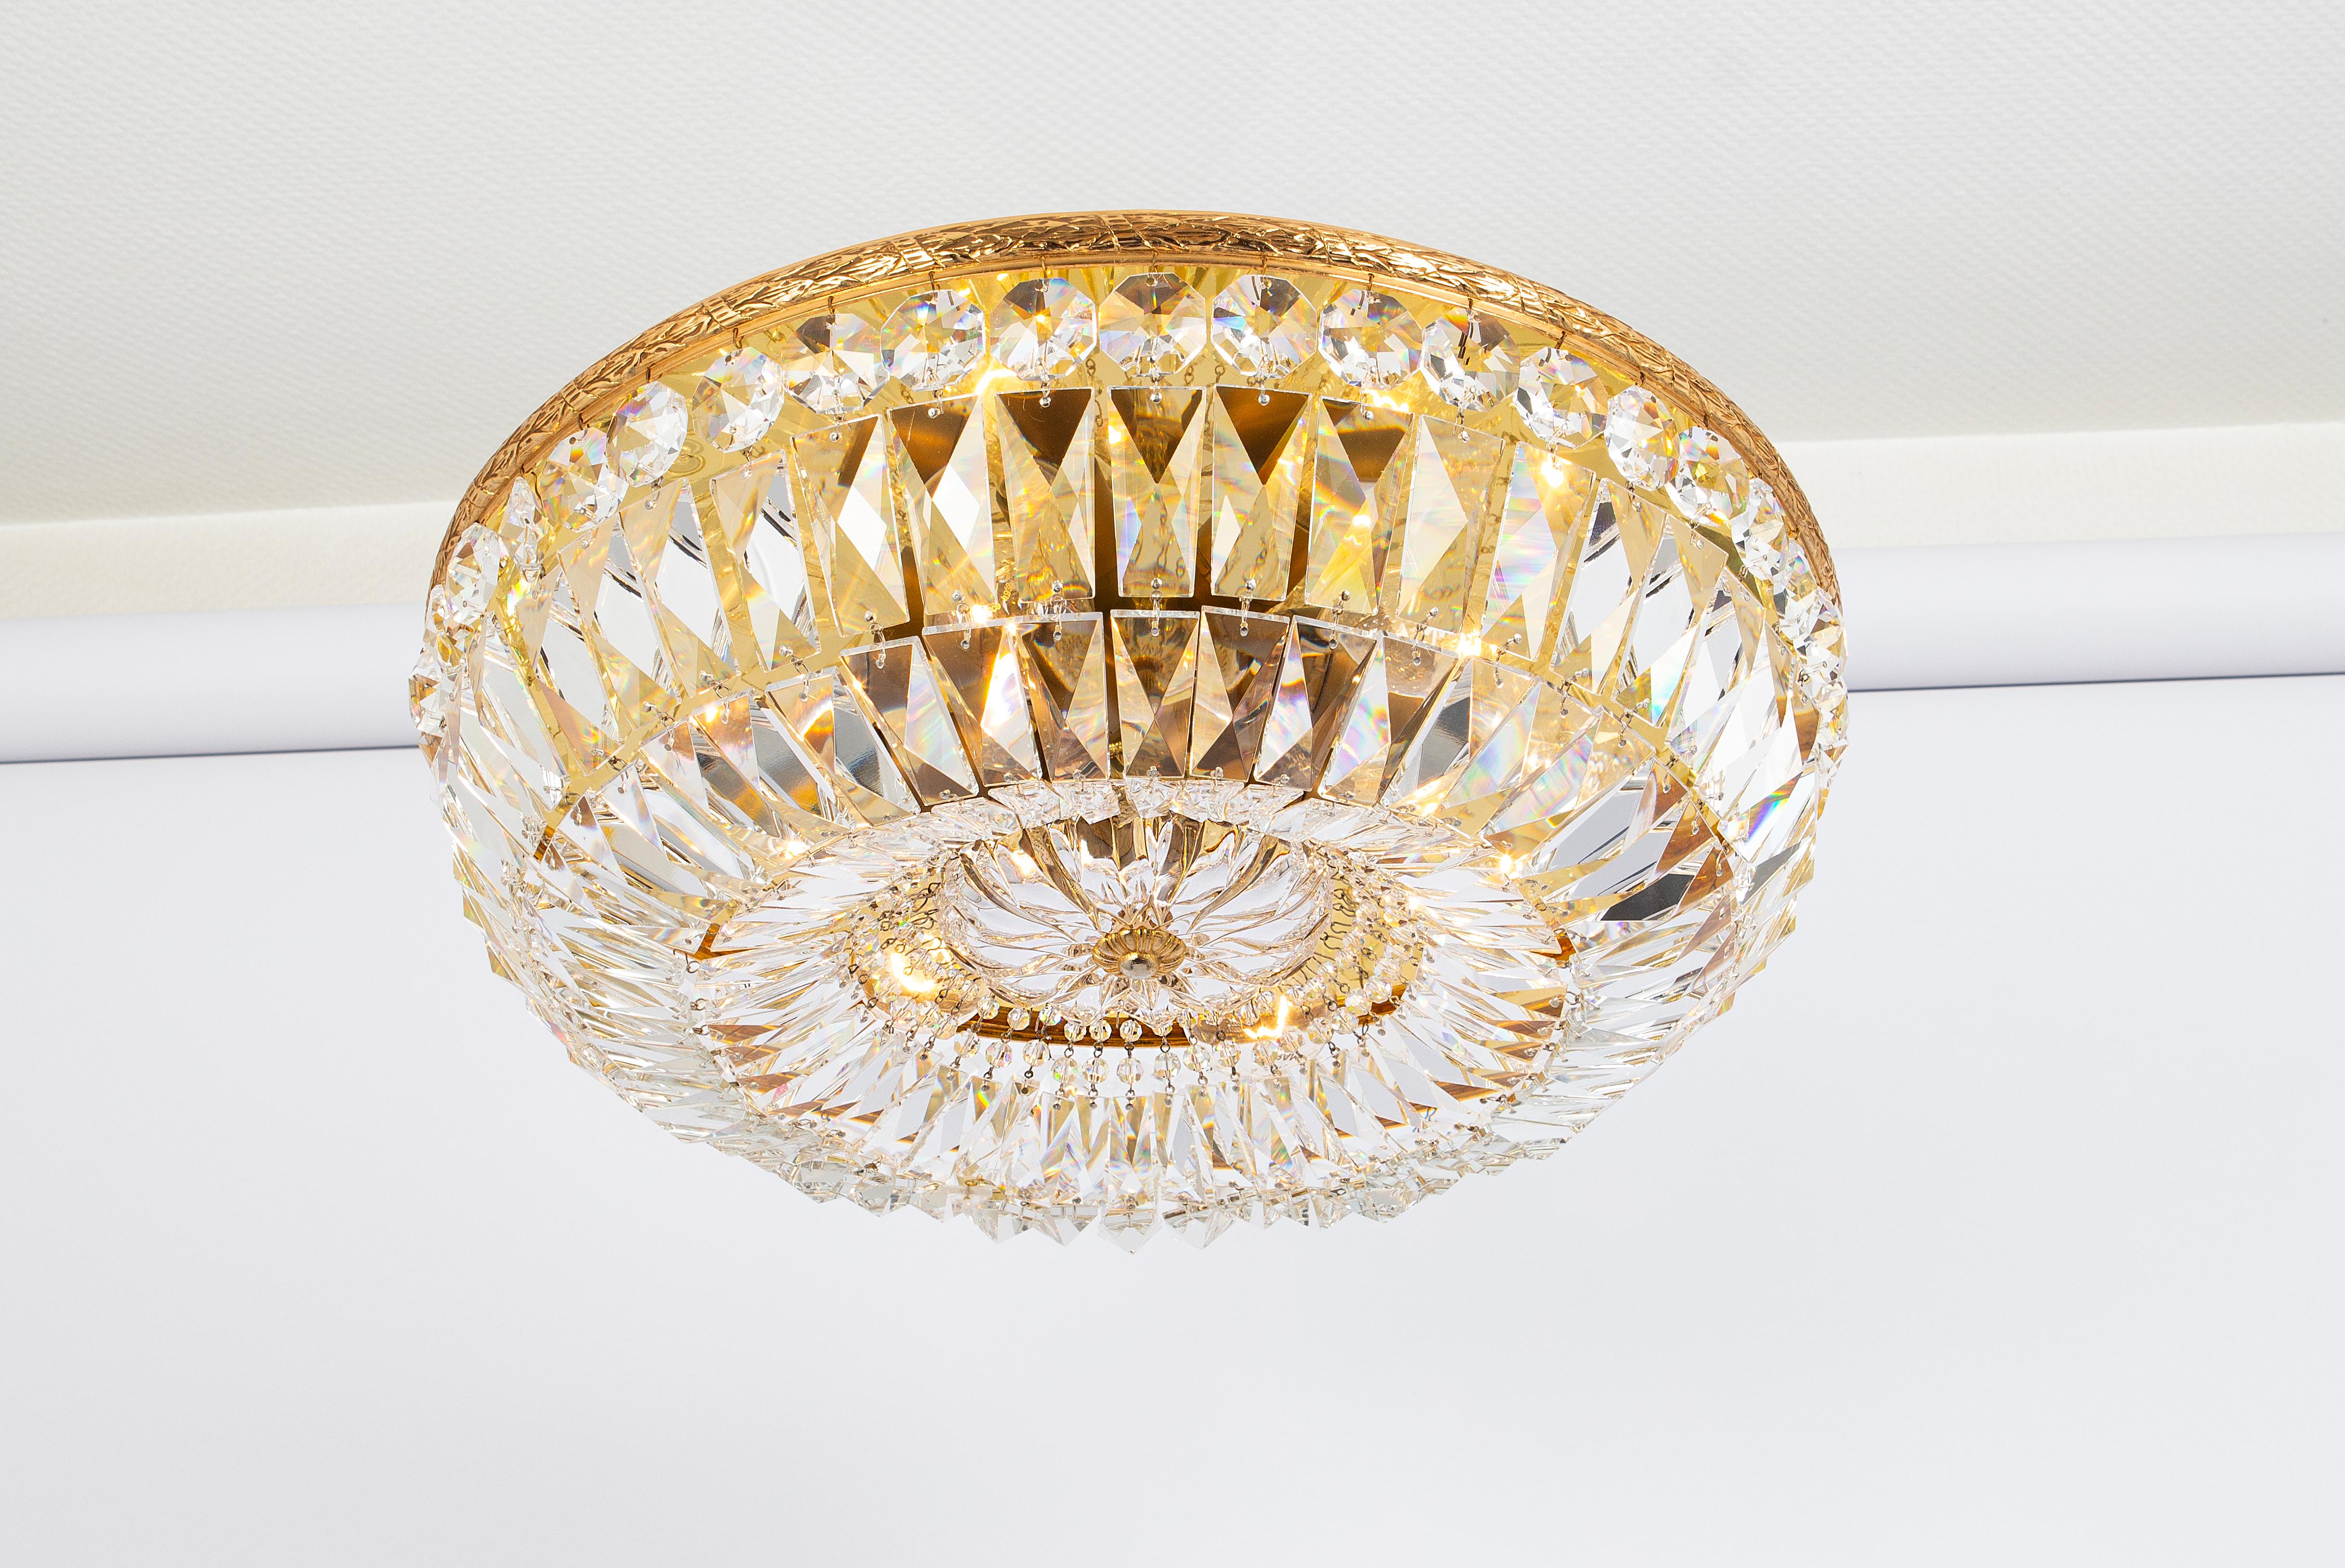 Petite Delicate floral Flush mount with crystal glass and gilded brass parts made by Palwa, Germany, 1970s. Featuring a multitude of crystal glasses.
It is an exquisite lighting fixture that combines elegance, functionality, and a touch of luxury to